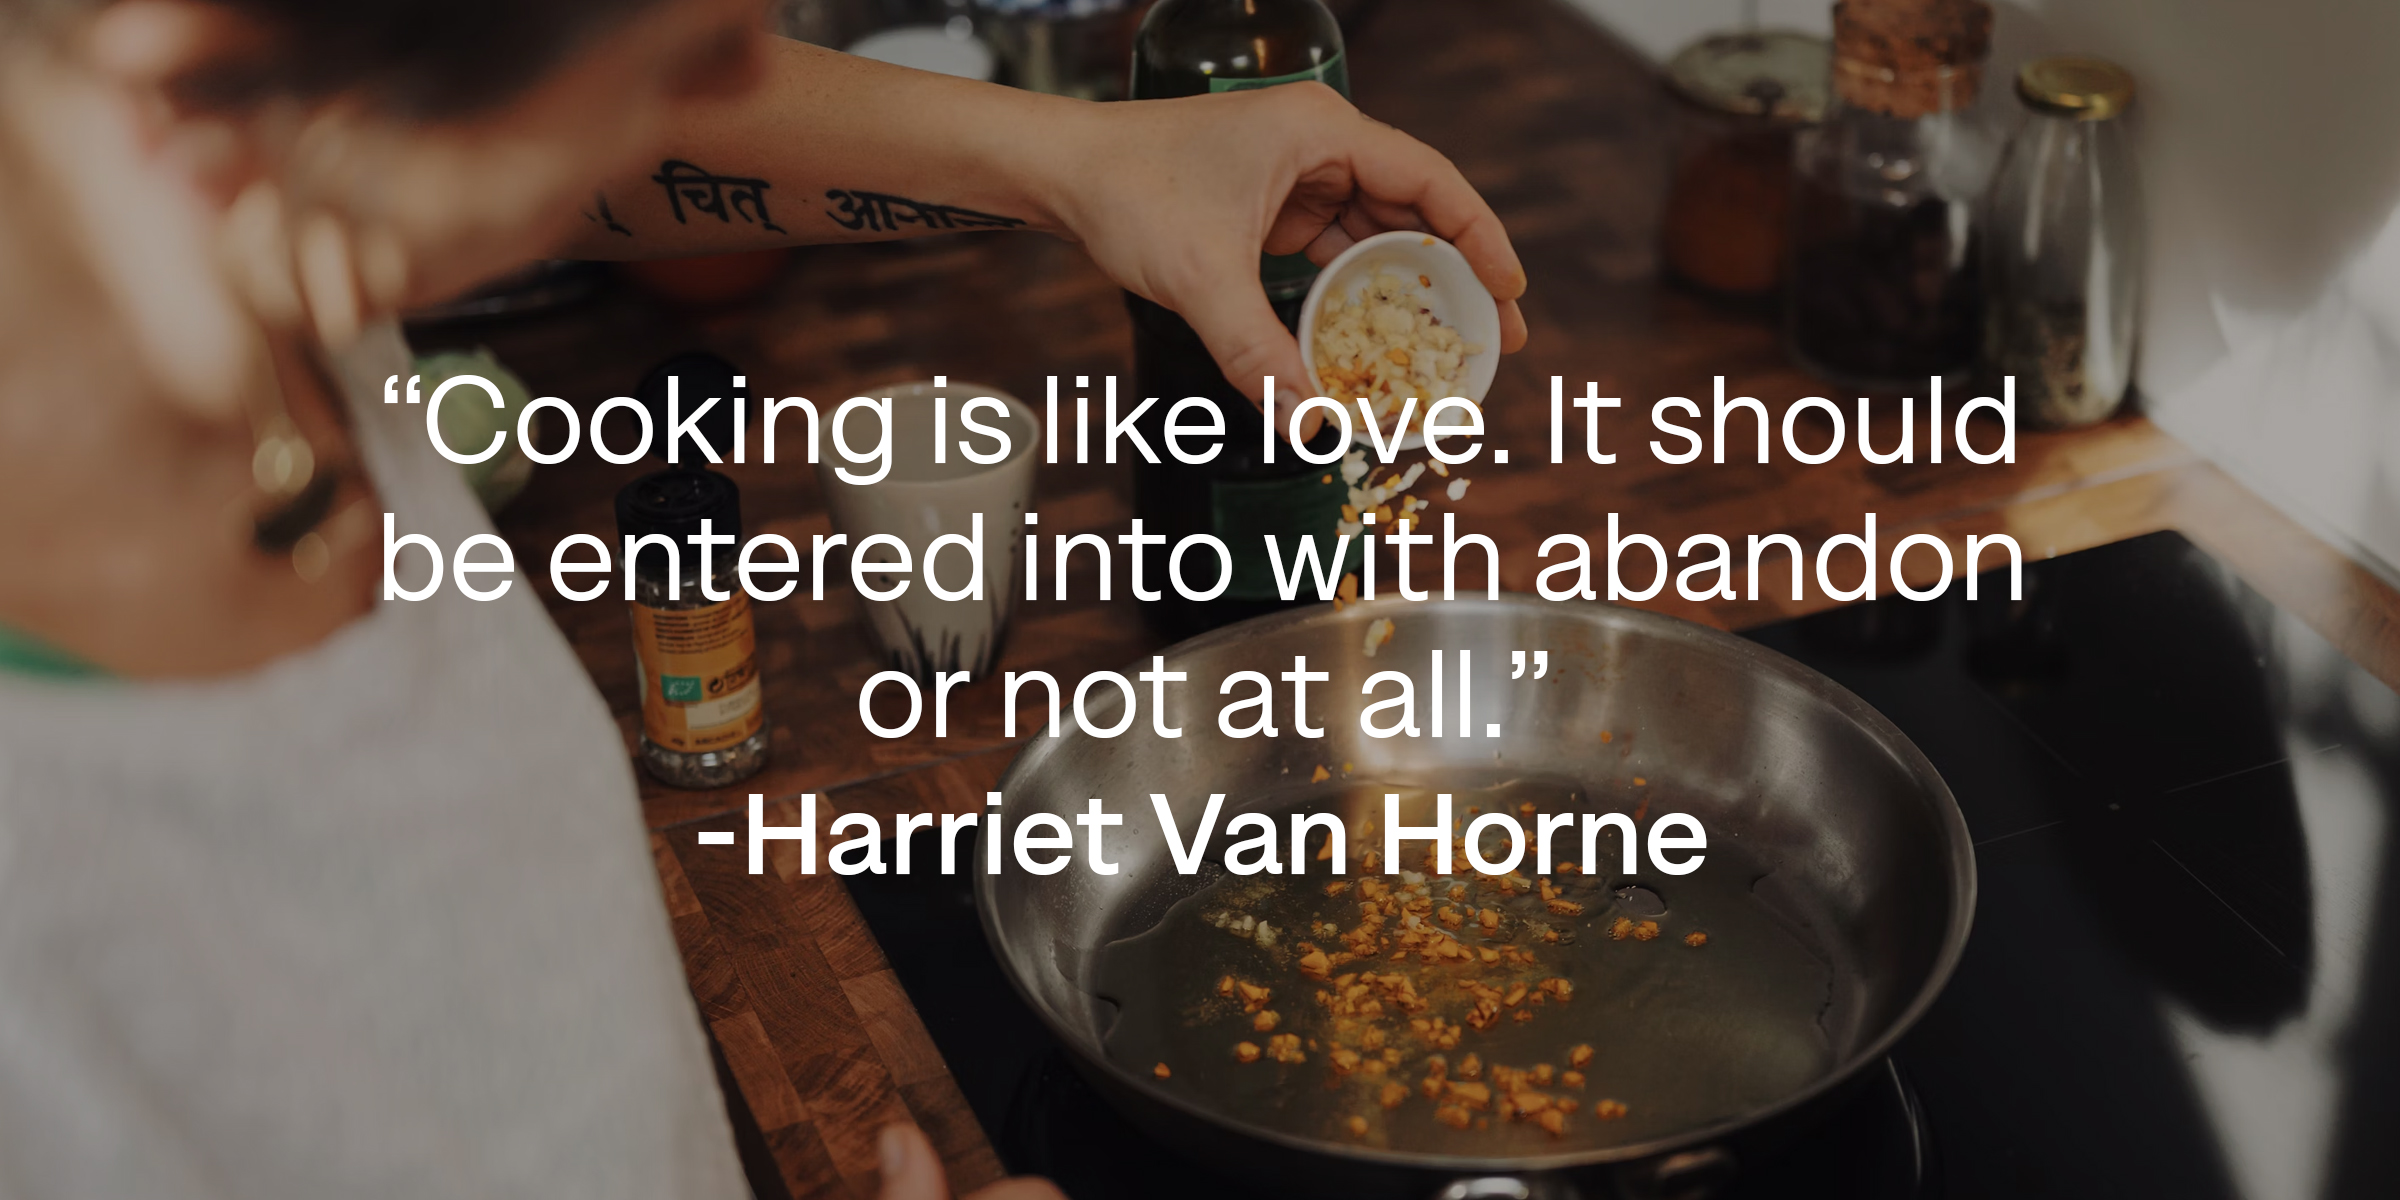 Harriet Van Horne's quote: "Cooking is like love. It should be entered into with abandon or not at all." Source: Brainyquote